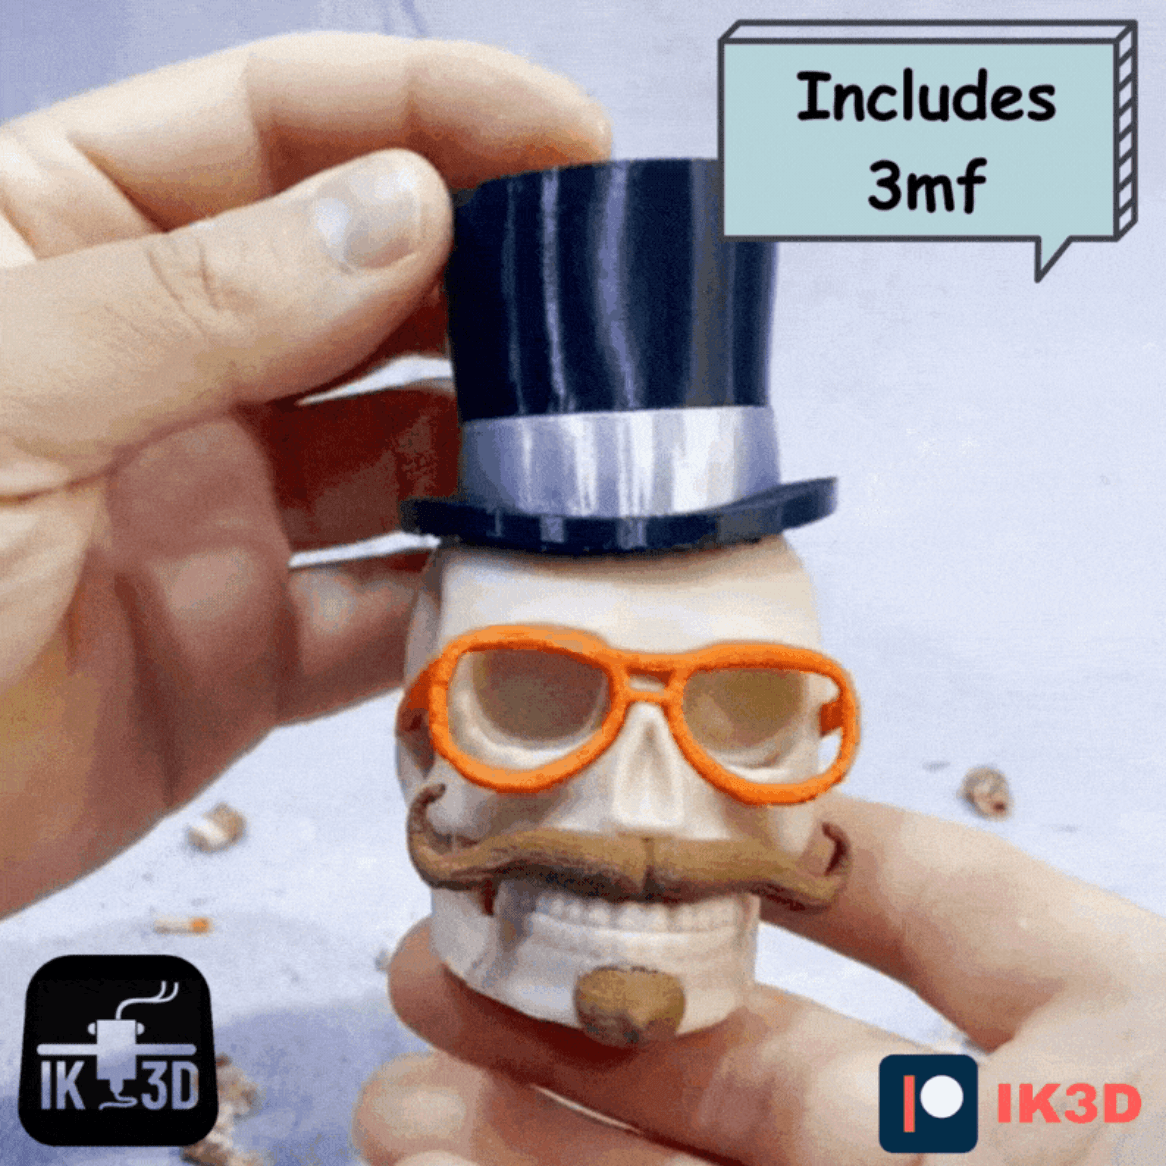 Skull Figurine with Top Hat, Moustache and Glasses / 3MF Included 3d model